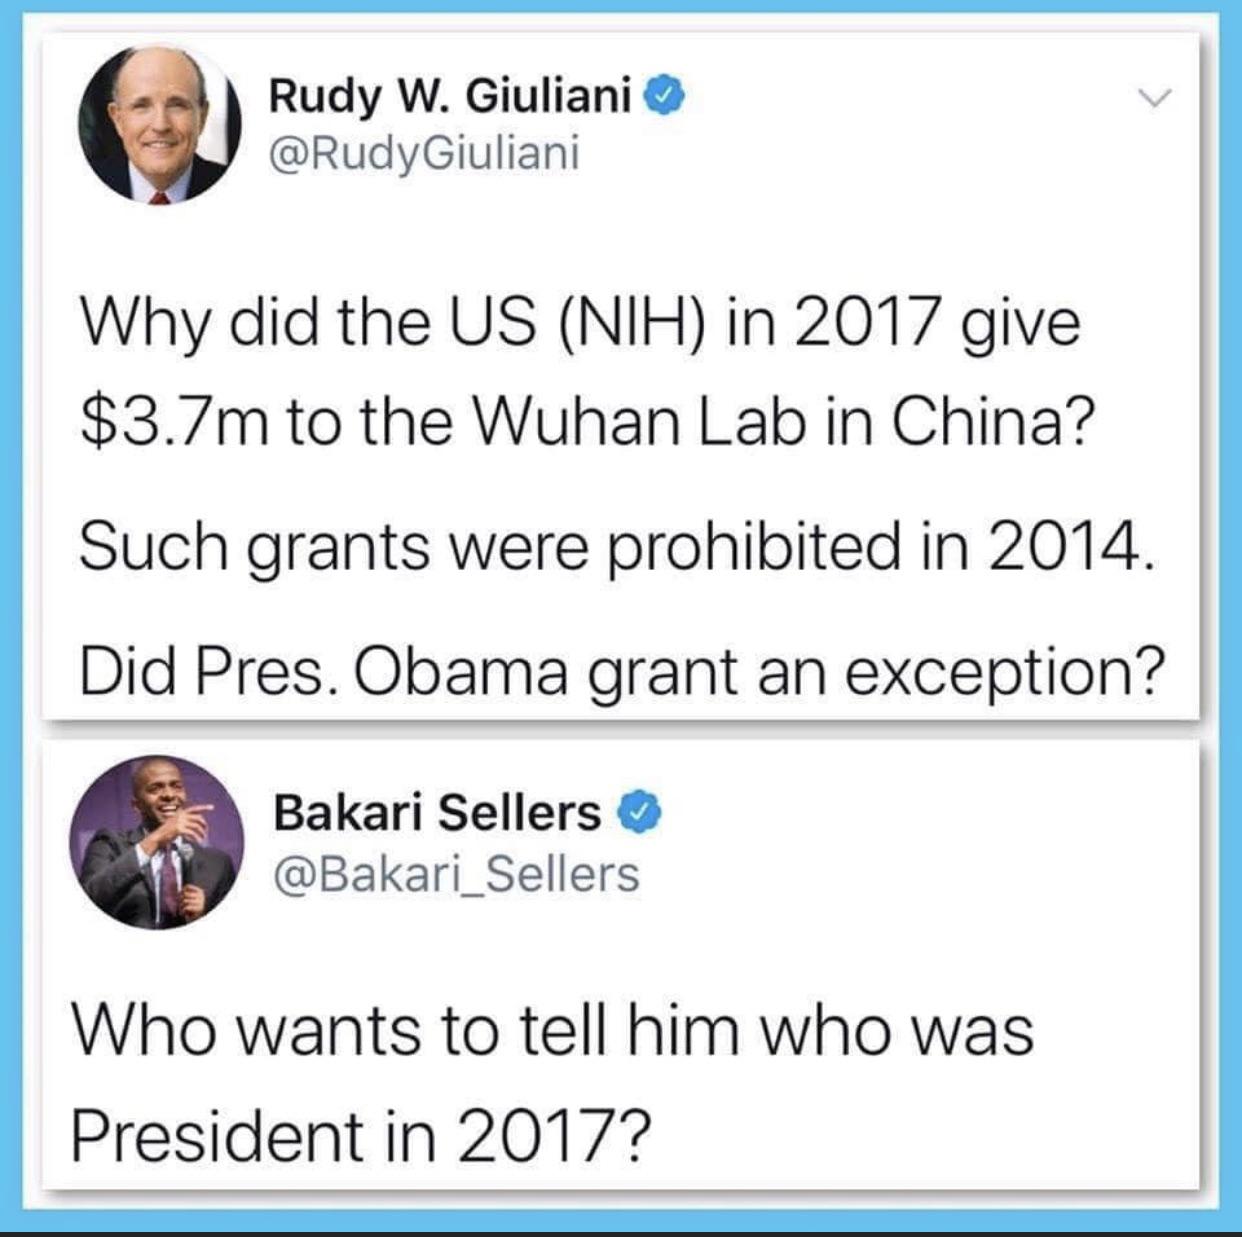 Political, Trump, Obama, Rudy, Wuhan, President Political Memes Political, Trump, Obama, Rudy, Wuhan, President text: Rudy W. Giuliani @RudyGiuliani Why did the US (NIH) in 2017 give $3.7m to the Wuhan Lab in China? Such grants were prohibited in 2014. Did Pres. Obama grant an exception? Bakari Sellers @Bakari_Sellers Who wants to tell him who was President in 2017? 